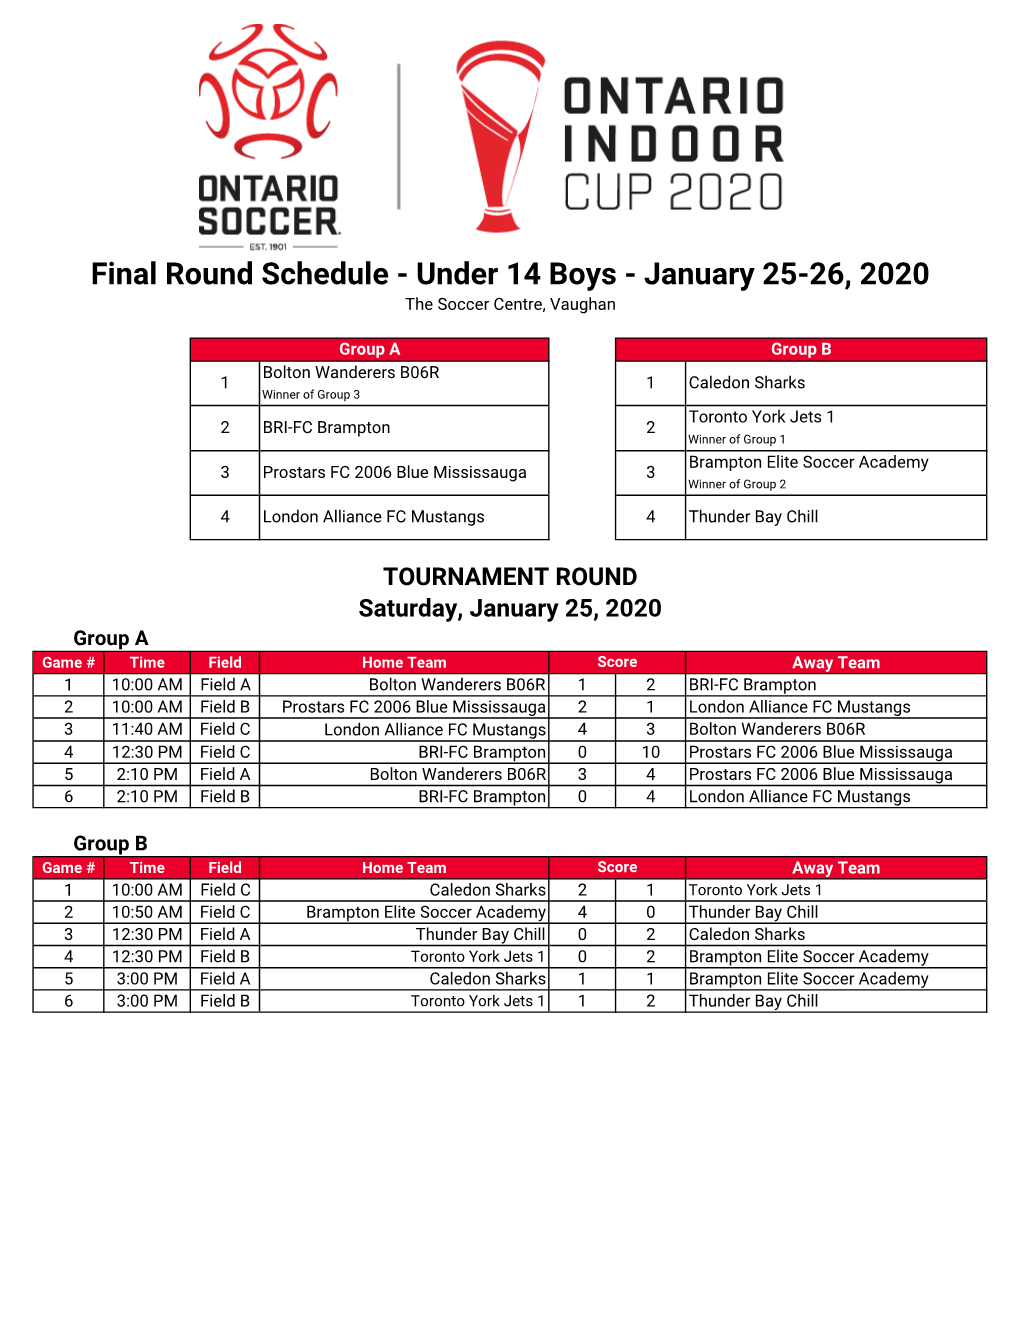 Final Round Schedule - Under 14 Boys - January 25-26, 2020 the Soccer Centre, Vaughan